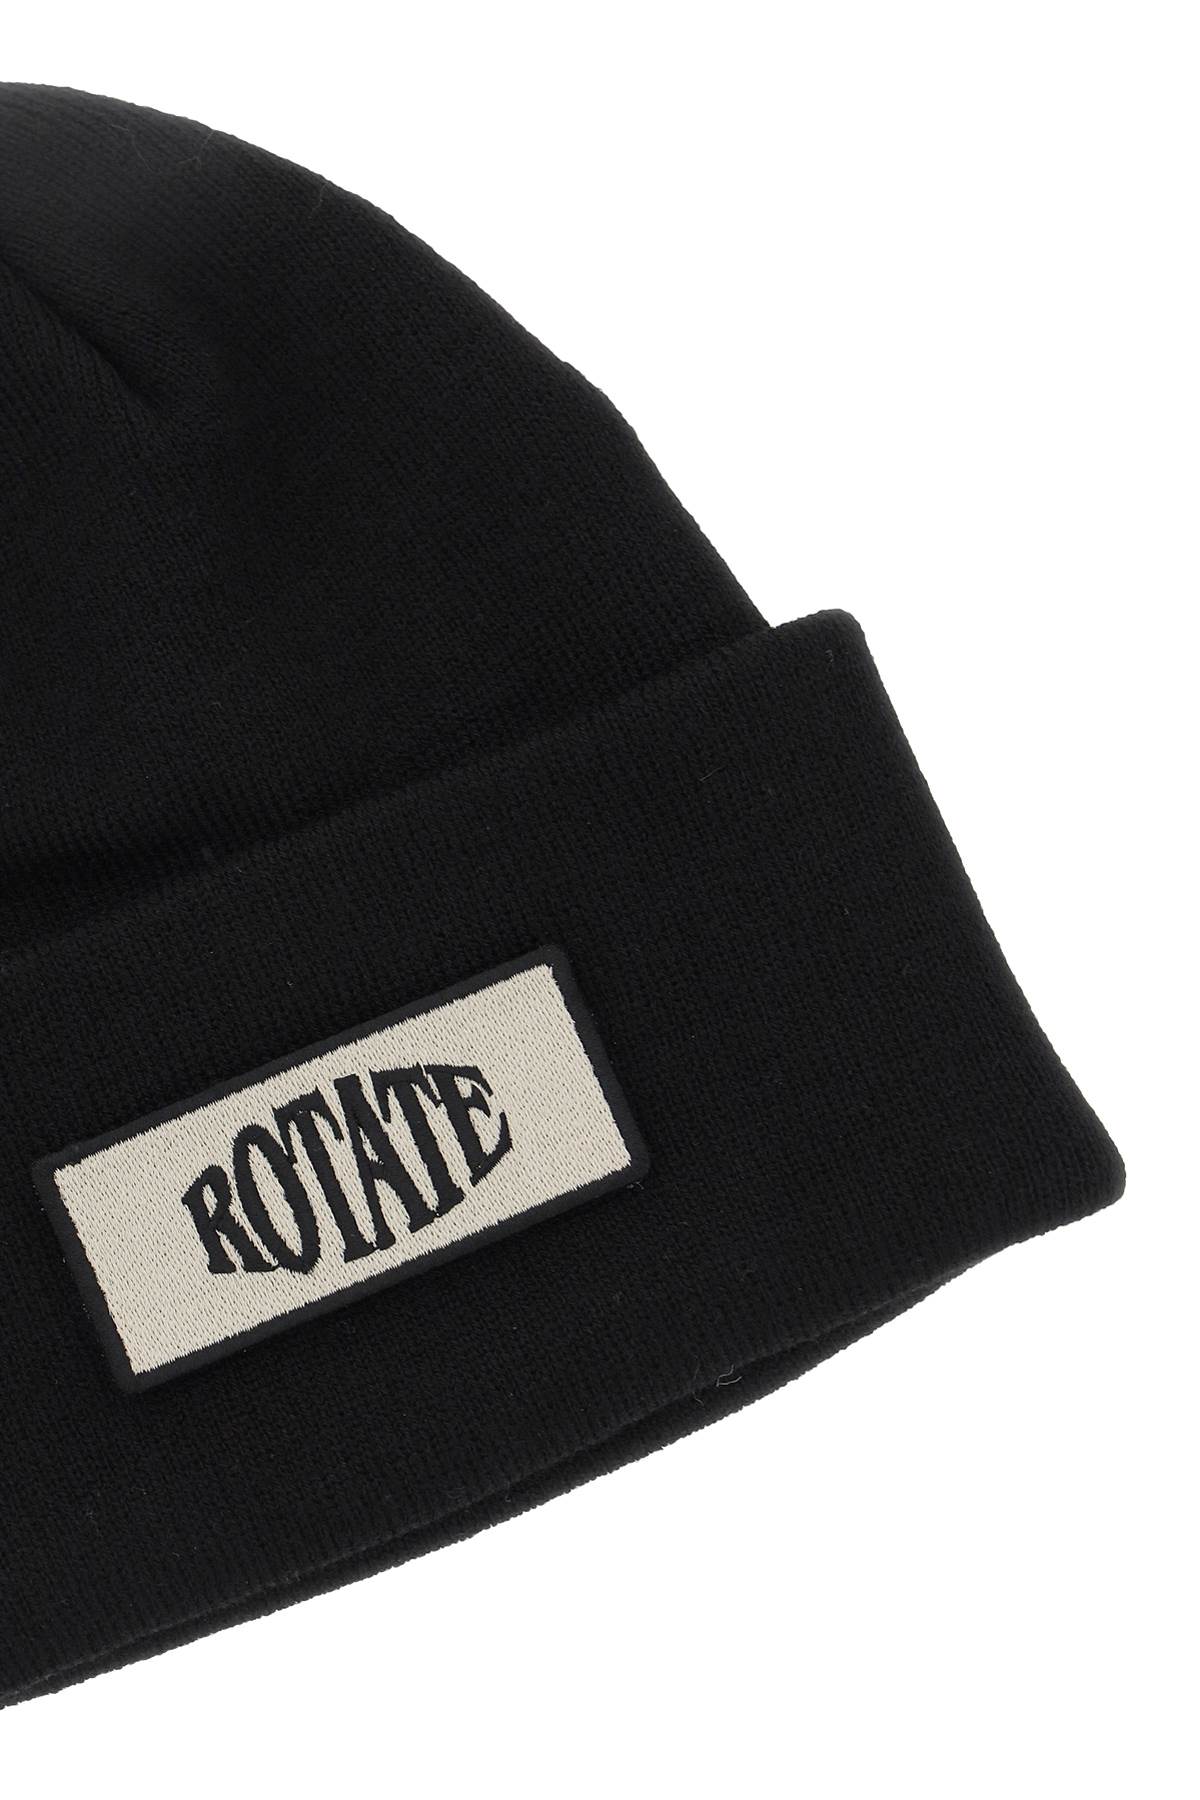 Rotate beanie hat with logo patch-women > accessories > scarves and gloves-Rotate-os-Black-Urbanheer